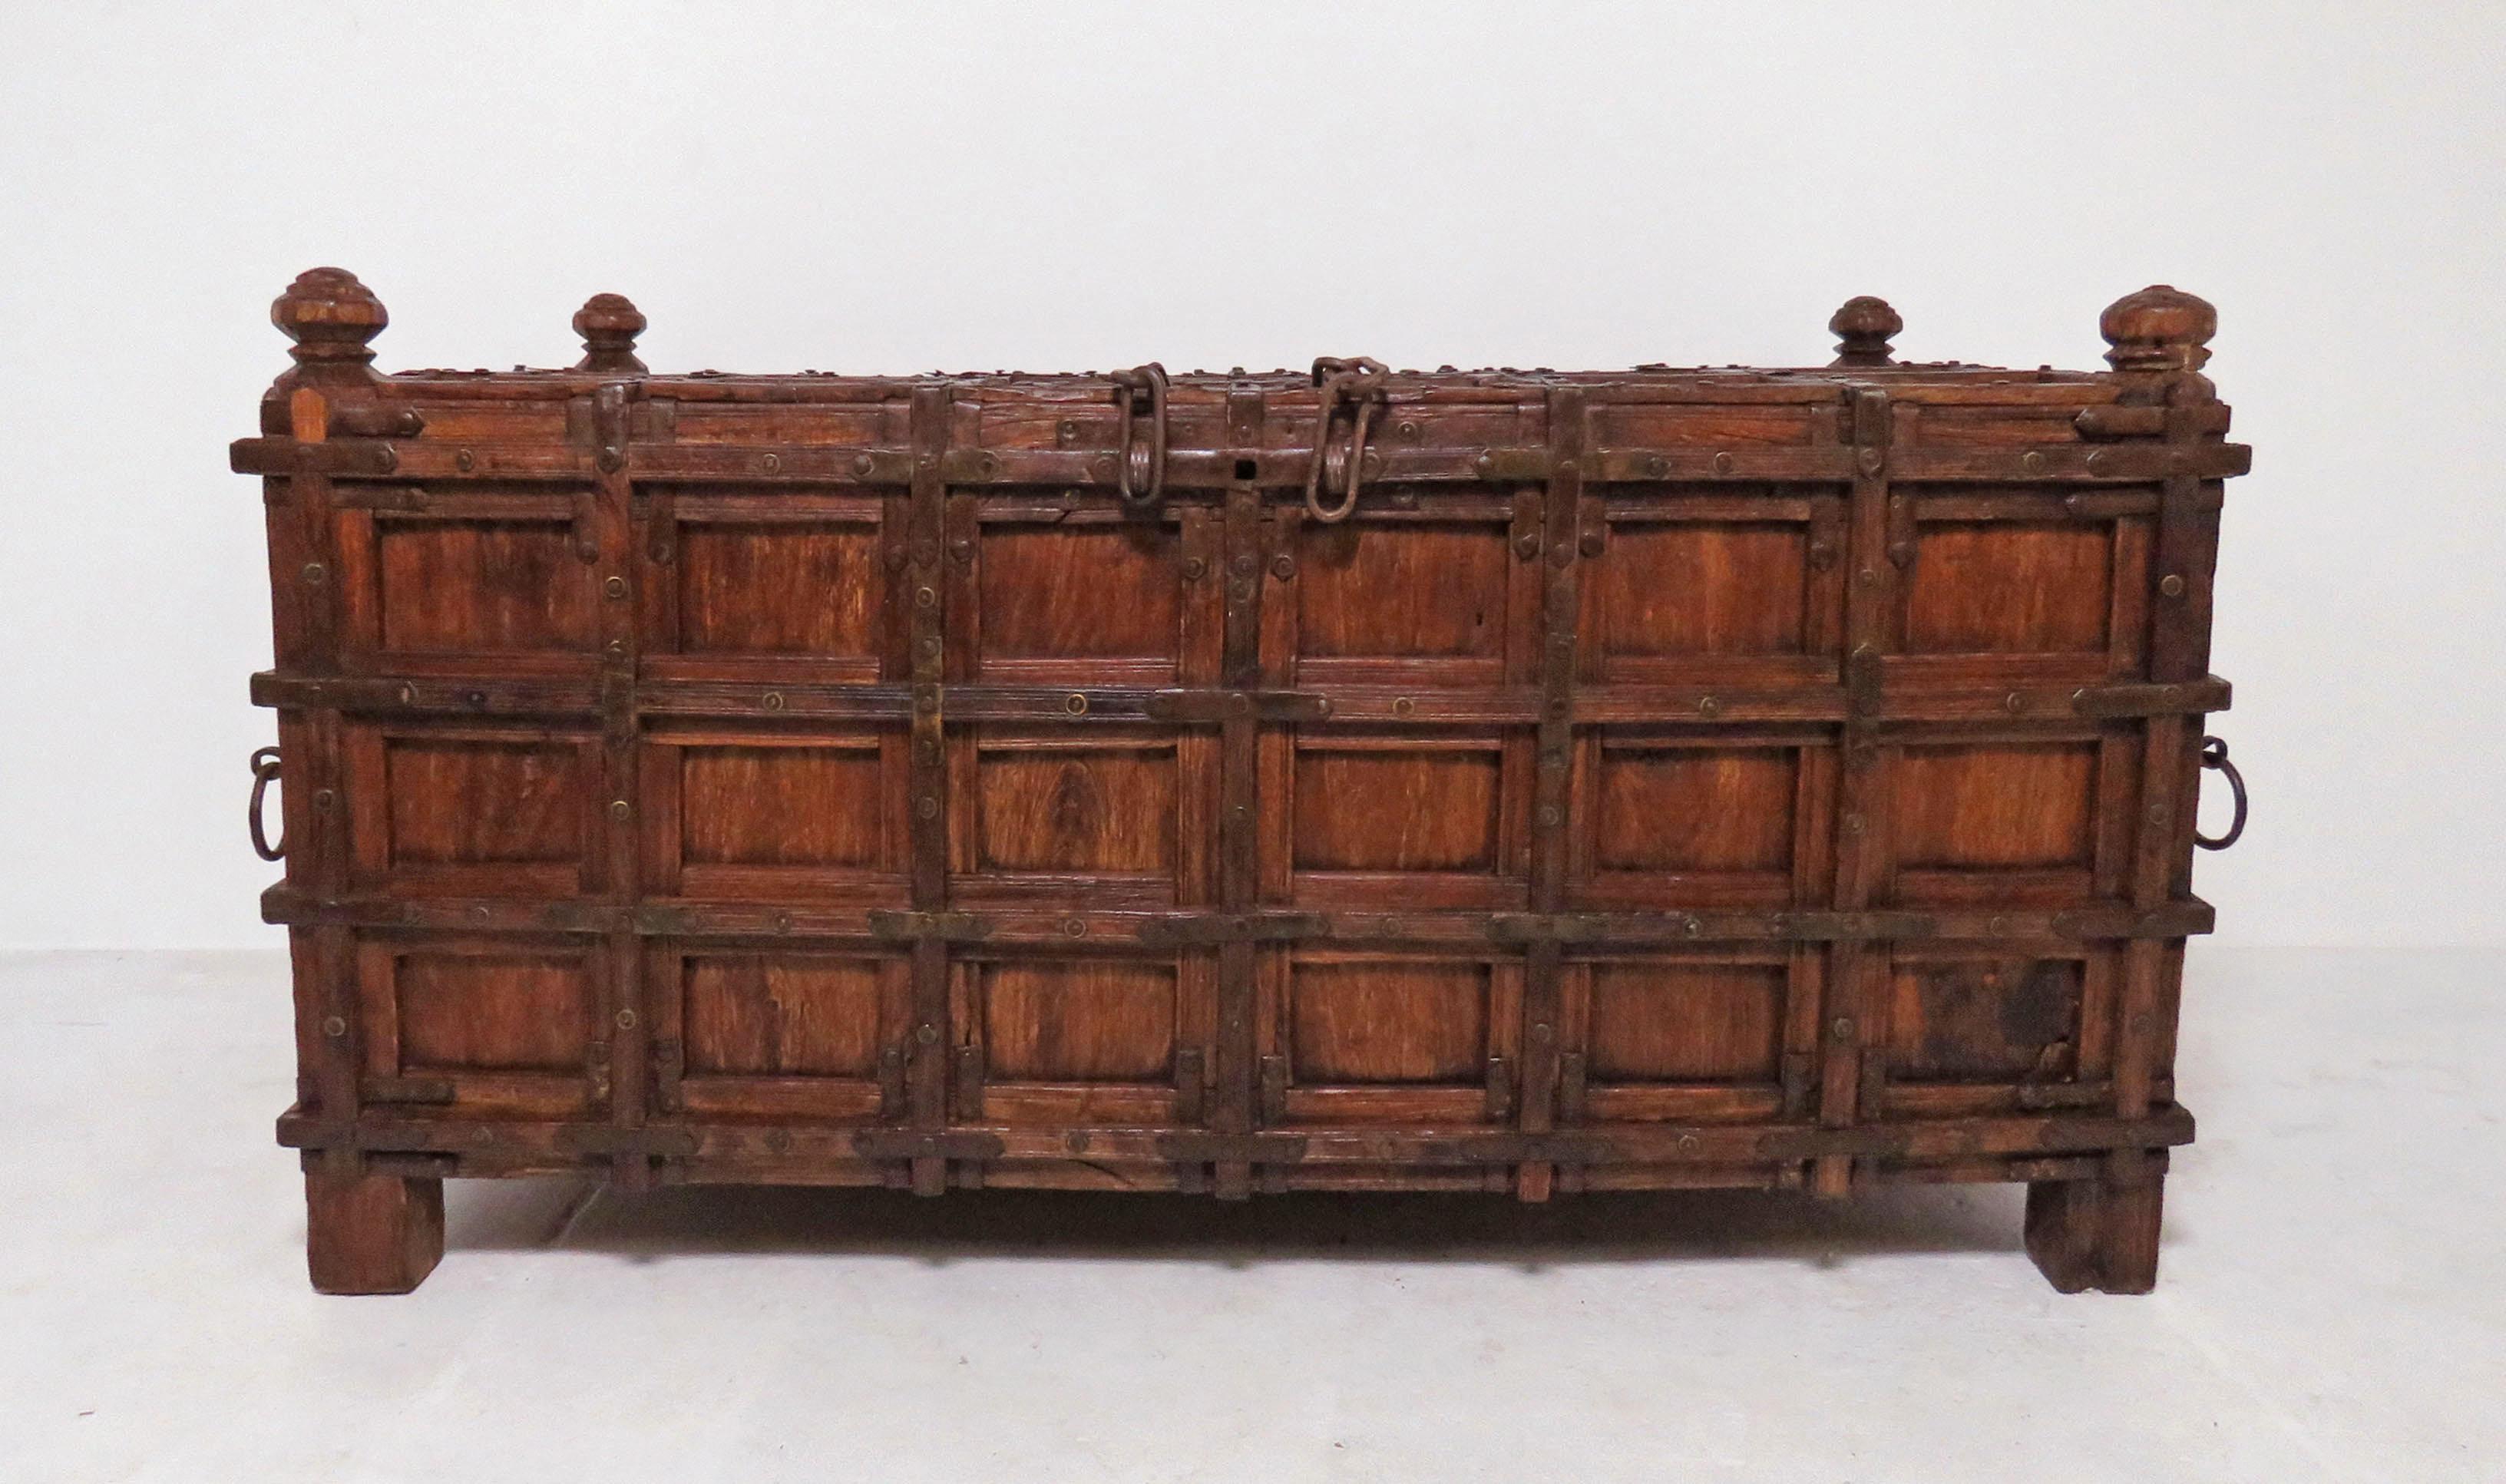 Monumental antique Anglo-Indian Damchiya, or dowry chest. Carved Burmese teak with hand forged iron strap work. Used for collecting and storing a young bride’s most precious silks, strongboxes such as this trace their origins to those created for